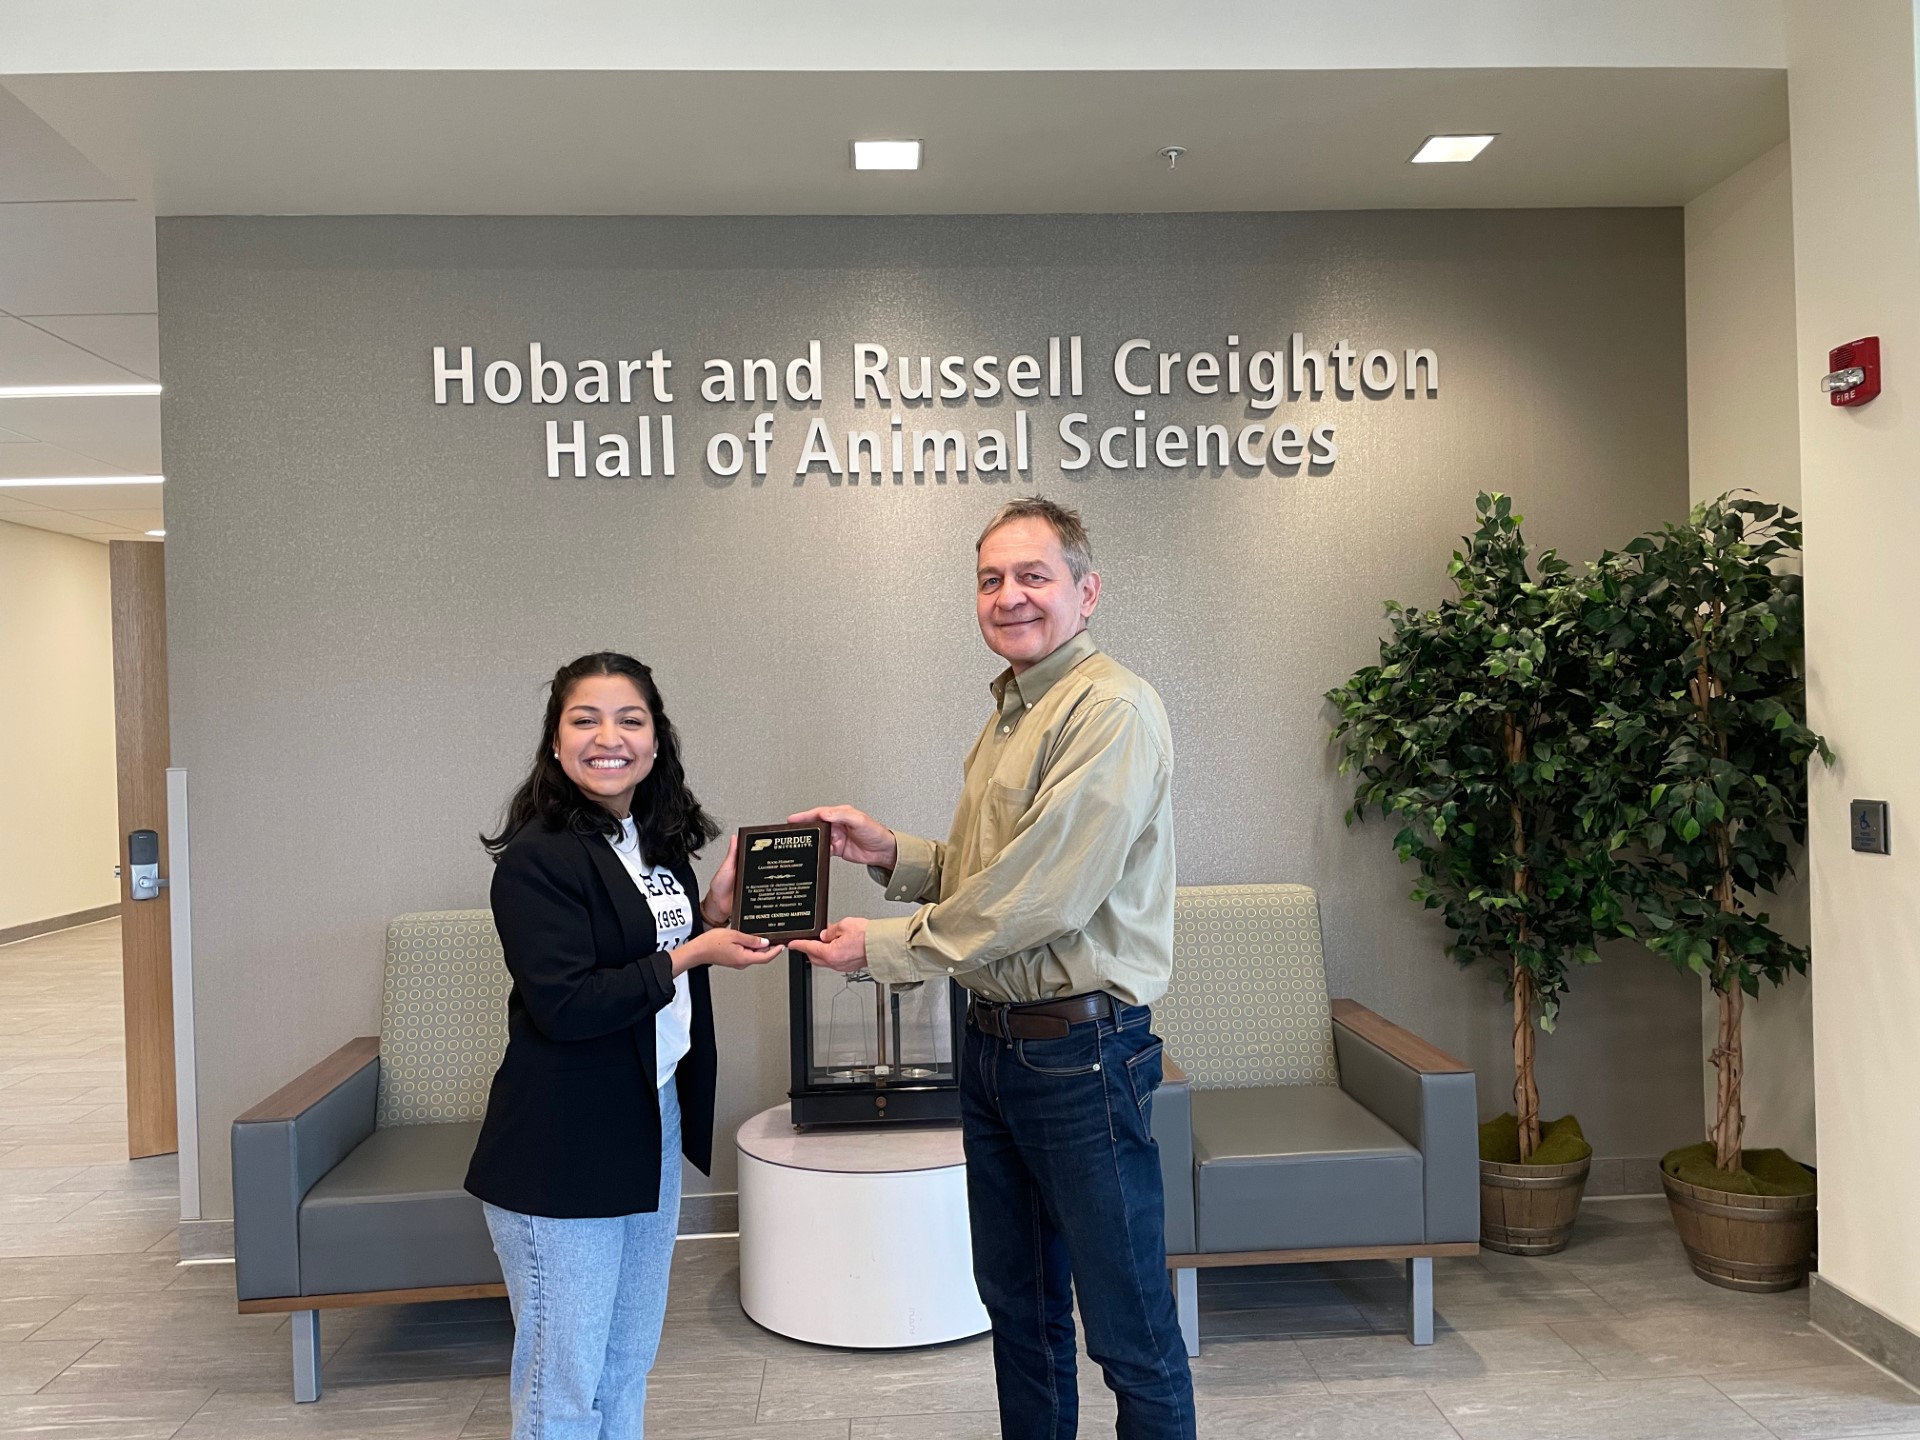 Ruth Eunice Centeno Martinez accepting the award from Dr. Zoltan Machaty, Chair of the Graduate Program Committee at the Department of Animal Sciences.